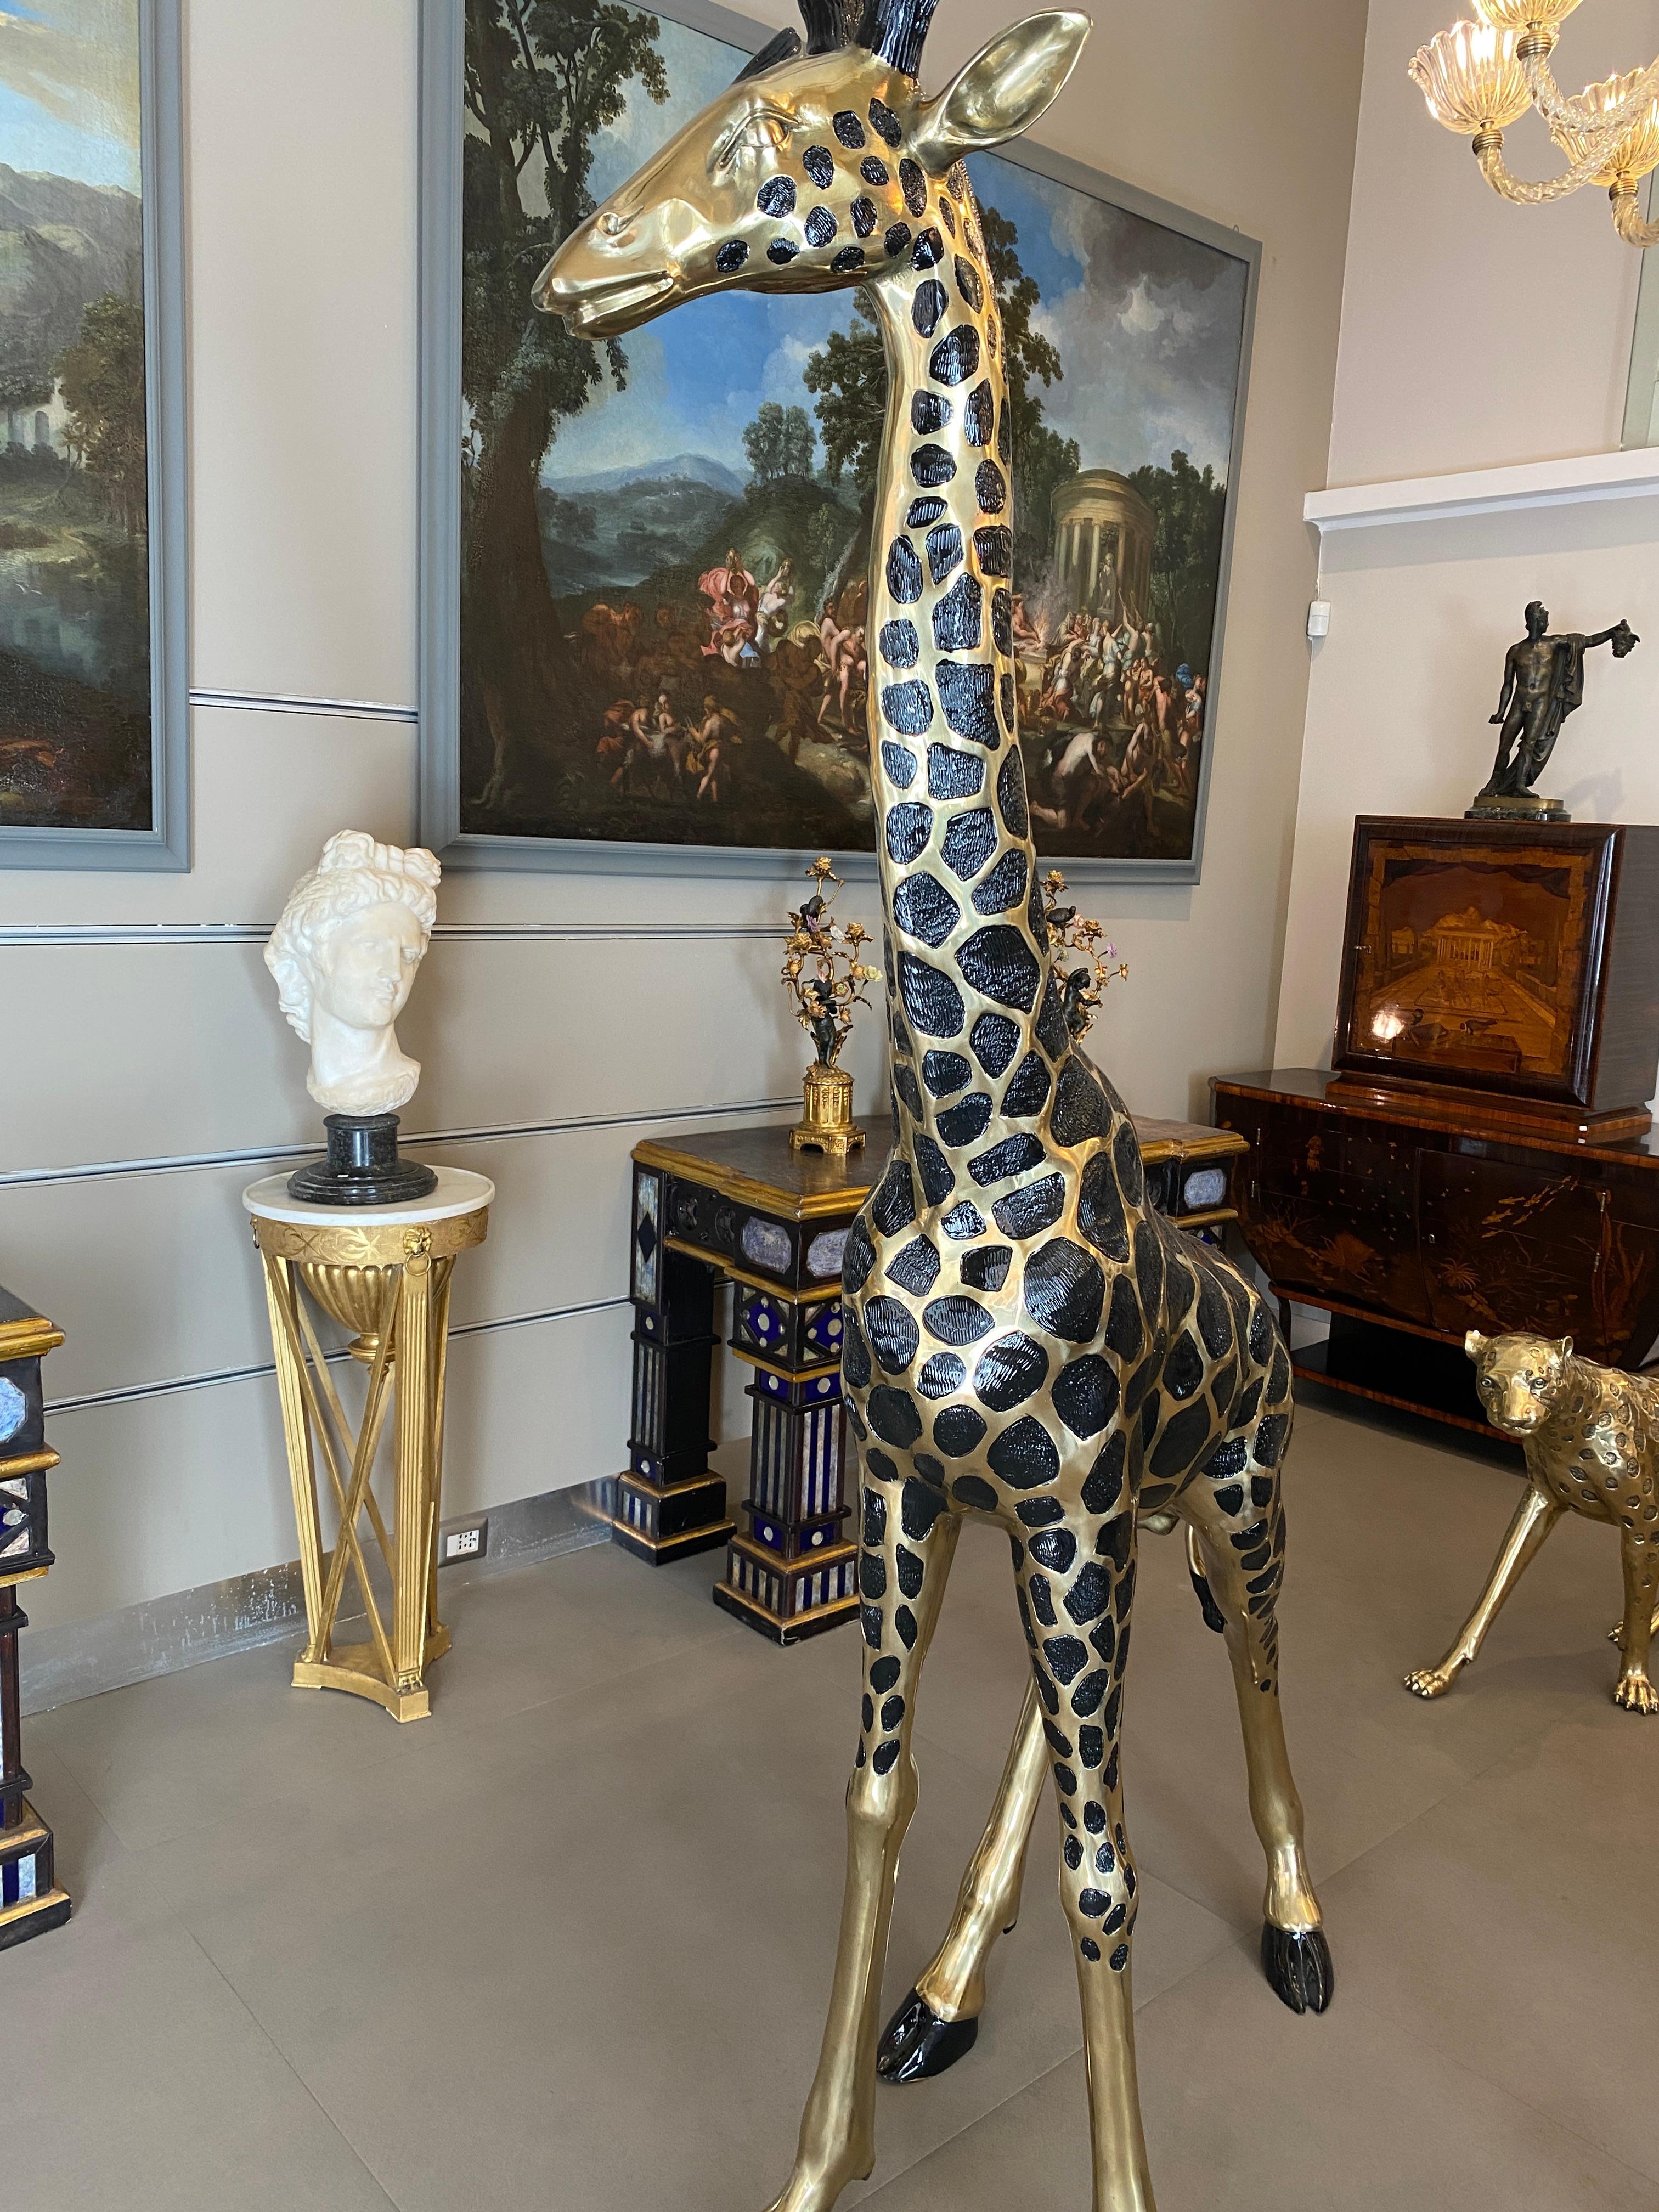  A pair of outstanding giraffe sculptures . 
The item will be well-suited to either an indoor or outdoor setting.
